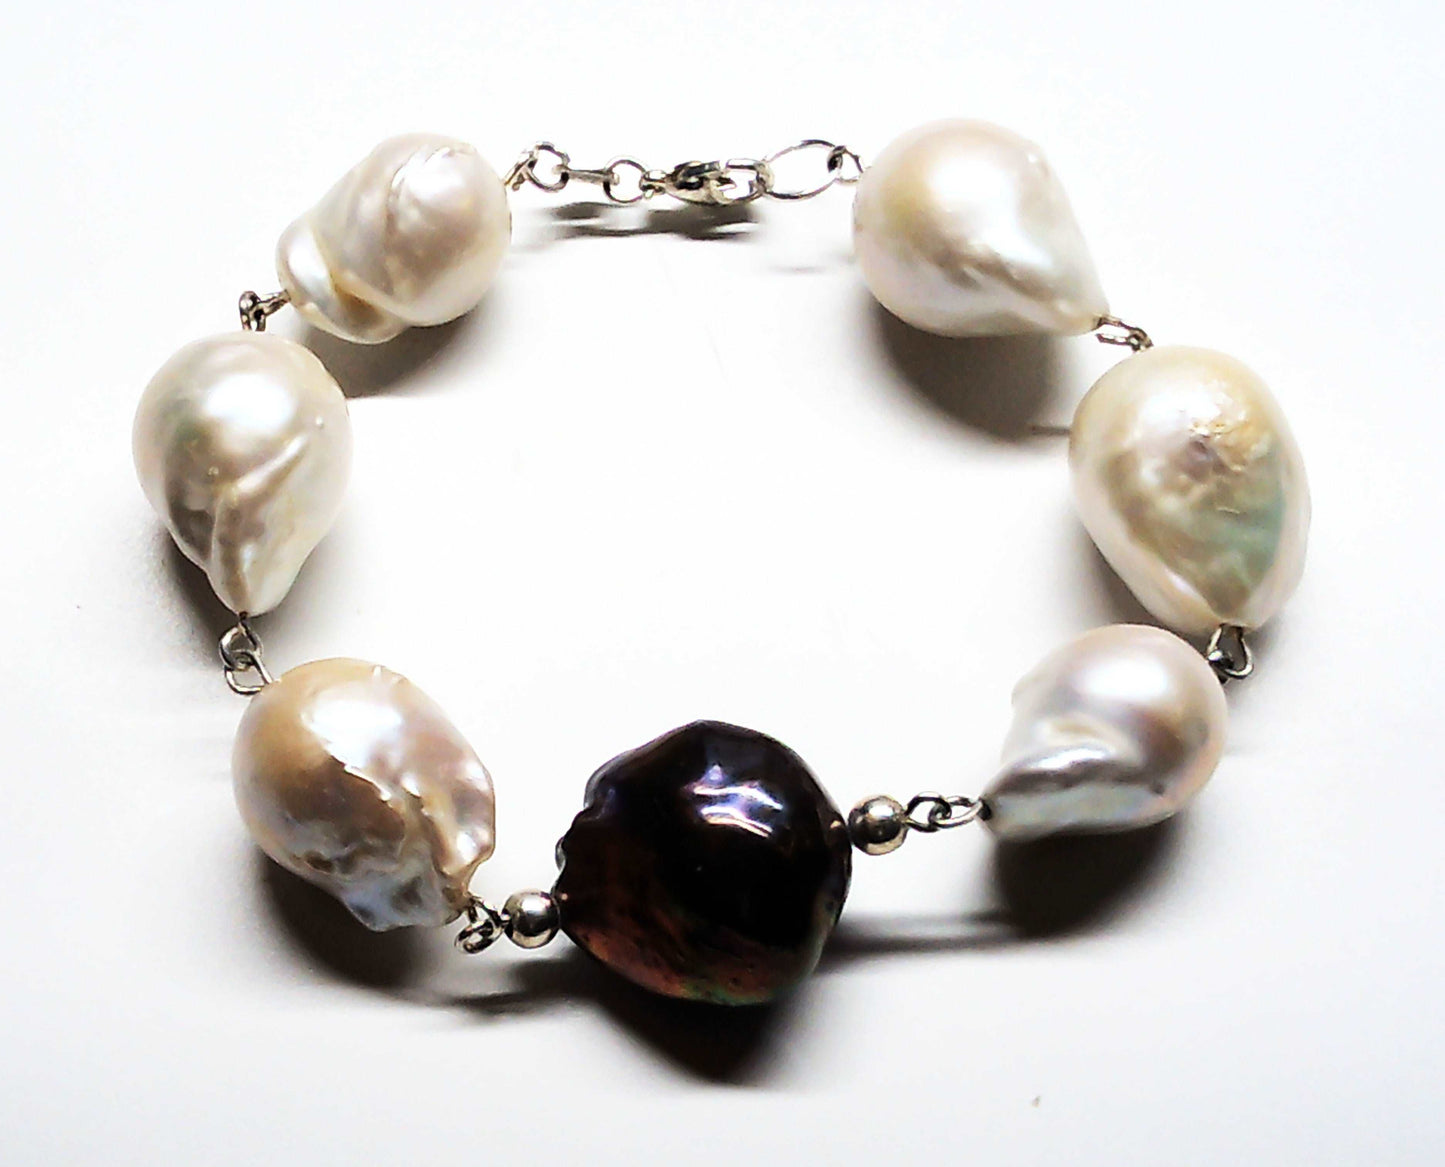 7.75 inch baroque pearl bracelet handcrafted in our shop solid sterling silver materials - Providence silver gold jewelry usa